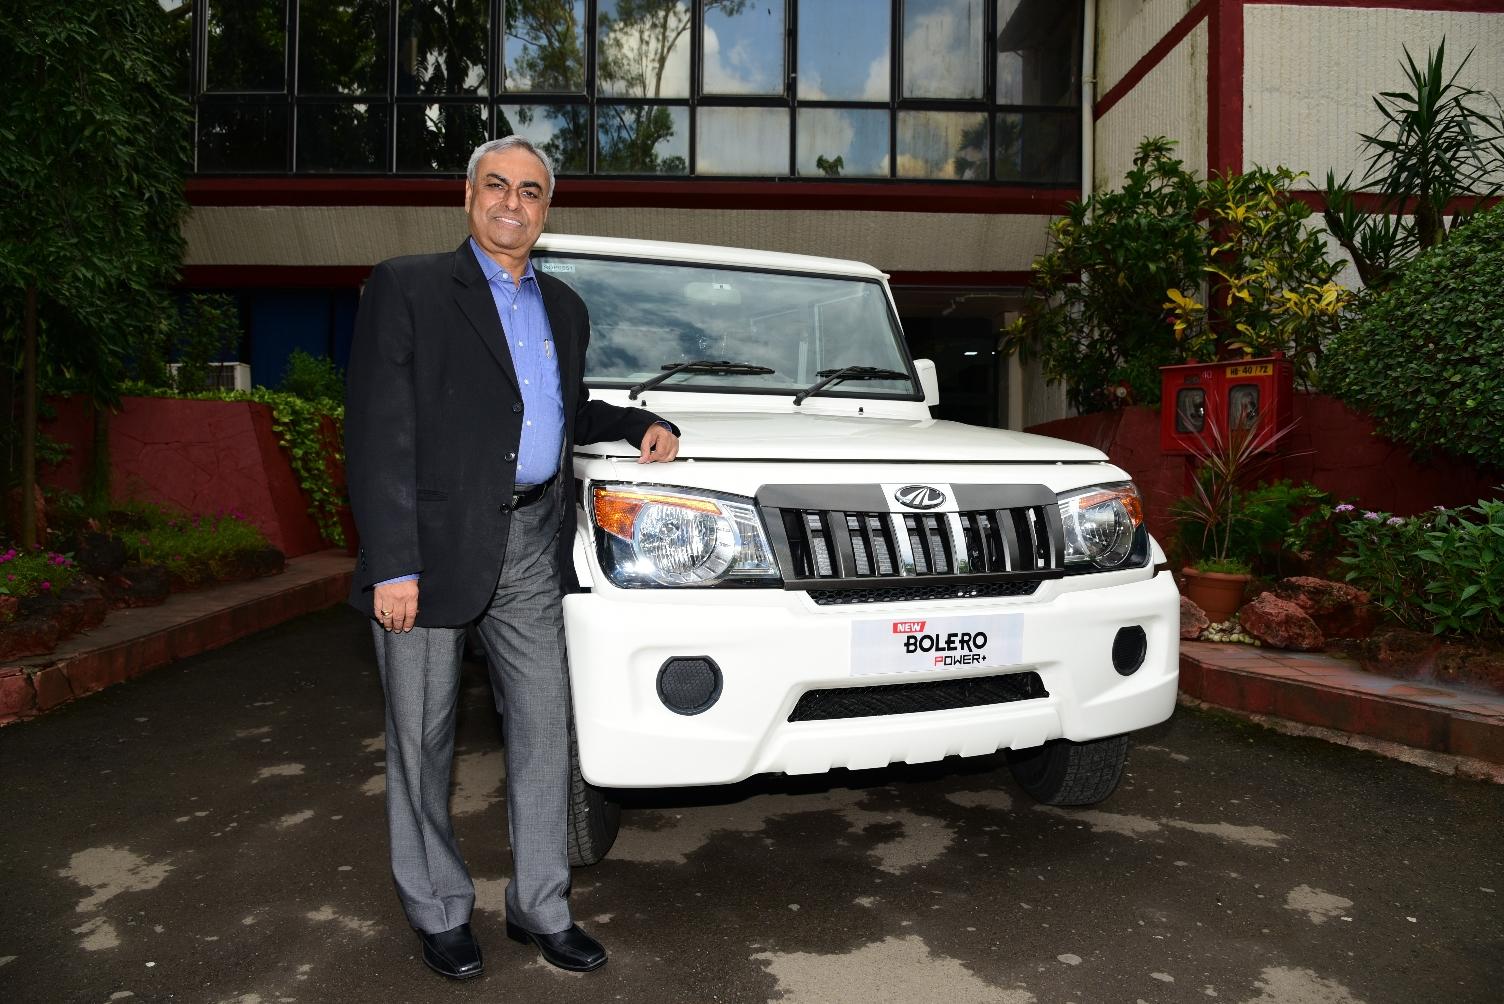 New Mahindra Bolero Power+ launched at a price of Rs 6.59 lakh (ex